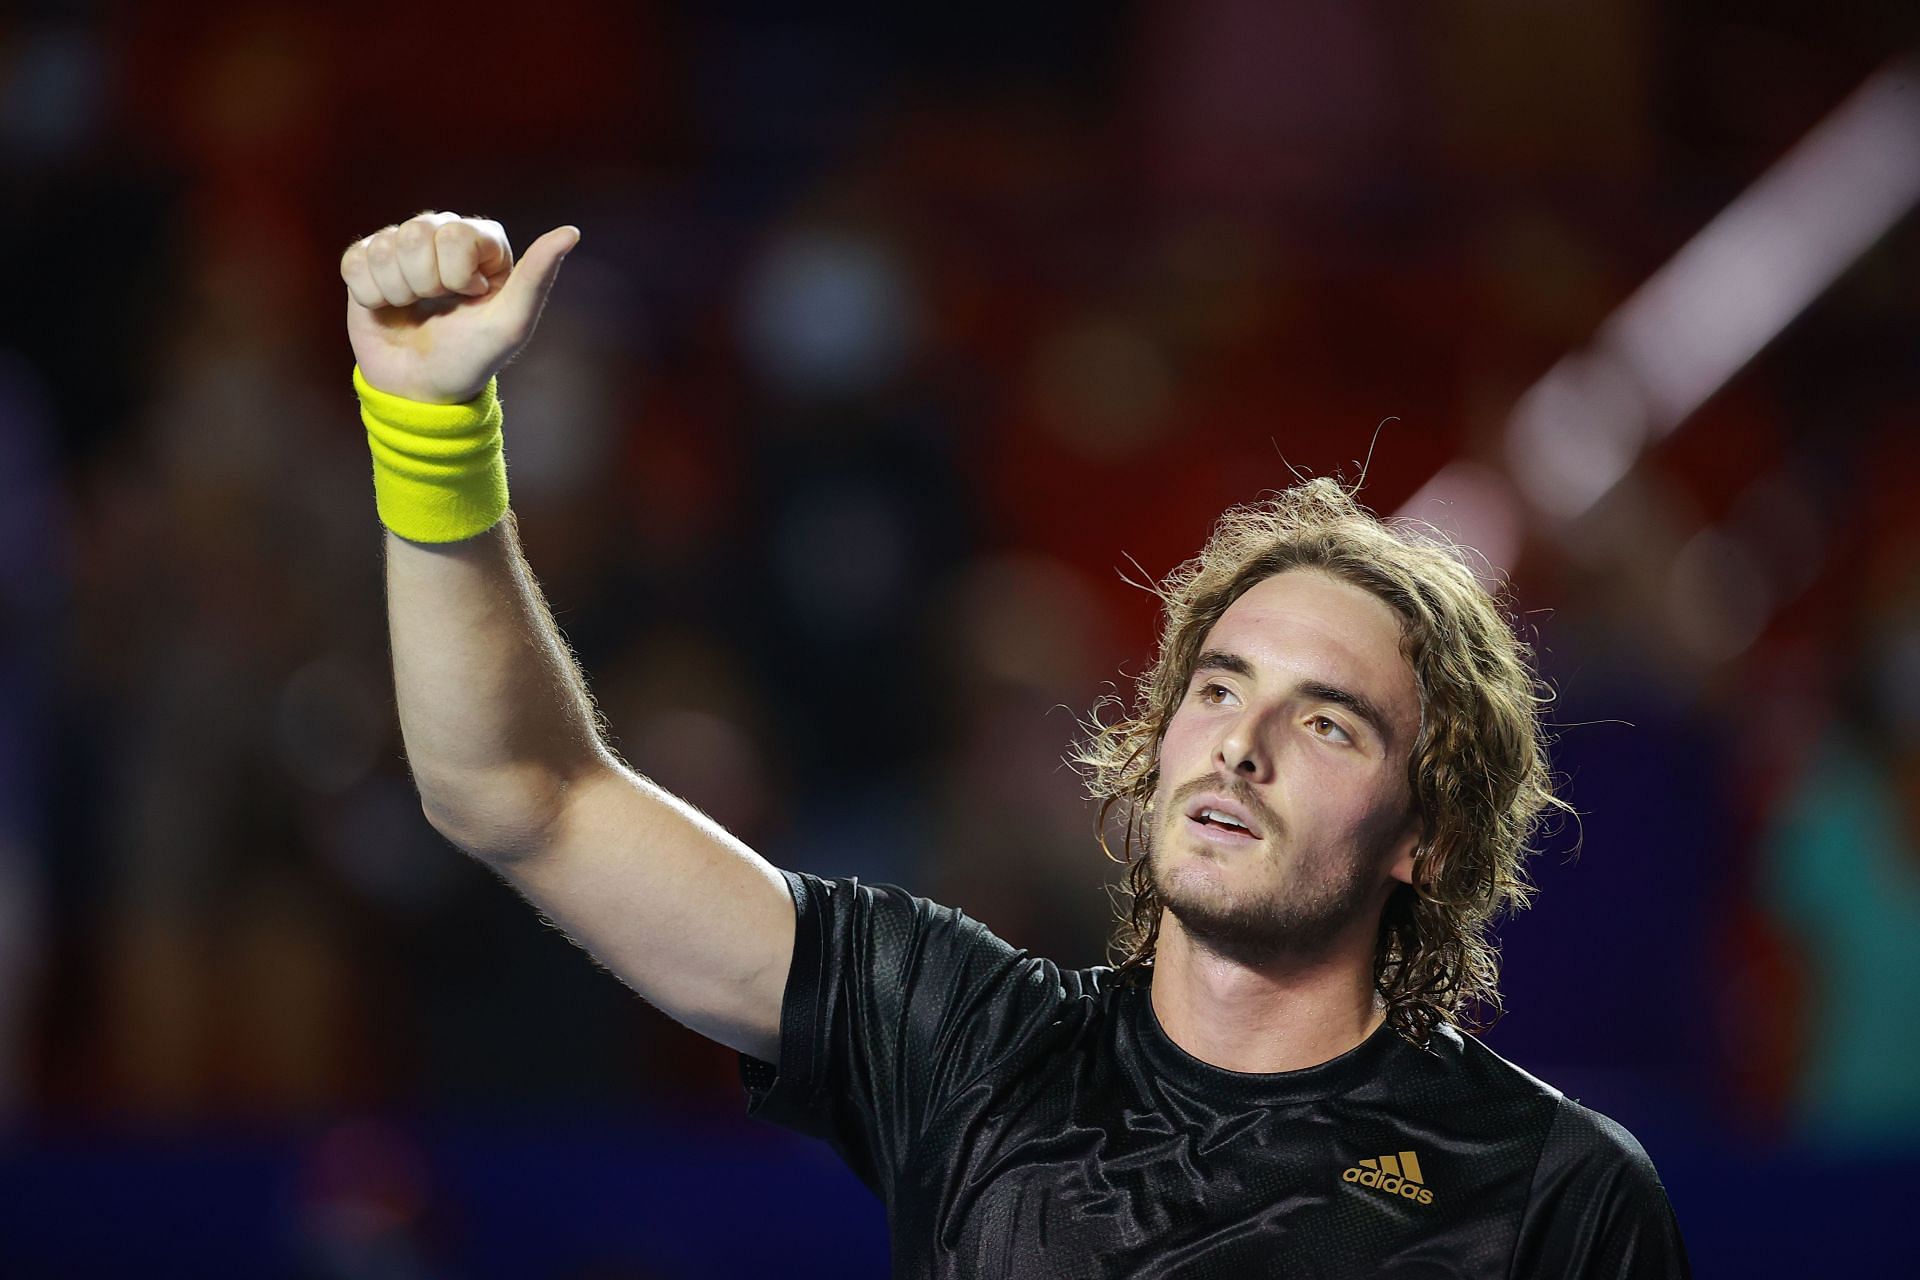 Stefanos Tsitsipas faces Lorenzo Musetti in the first round of the French Open